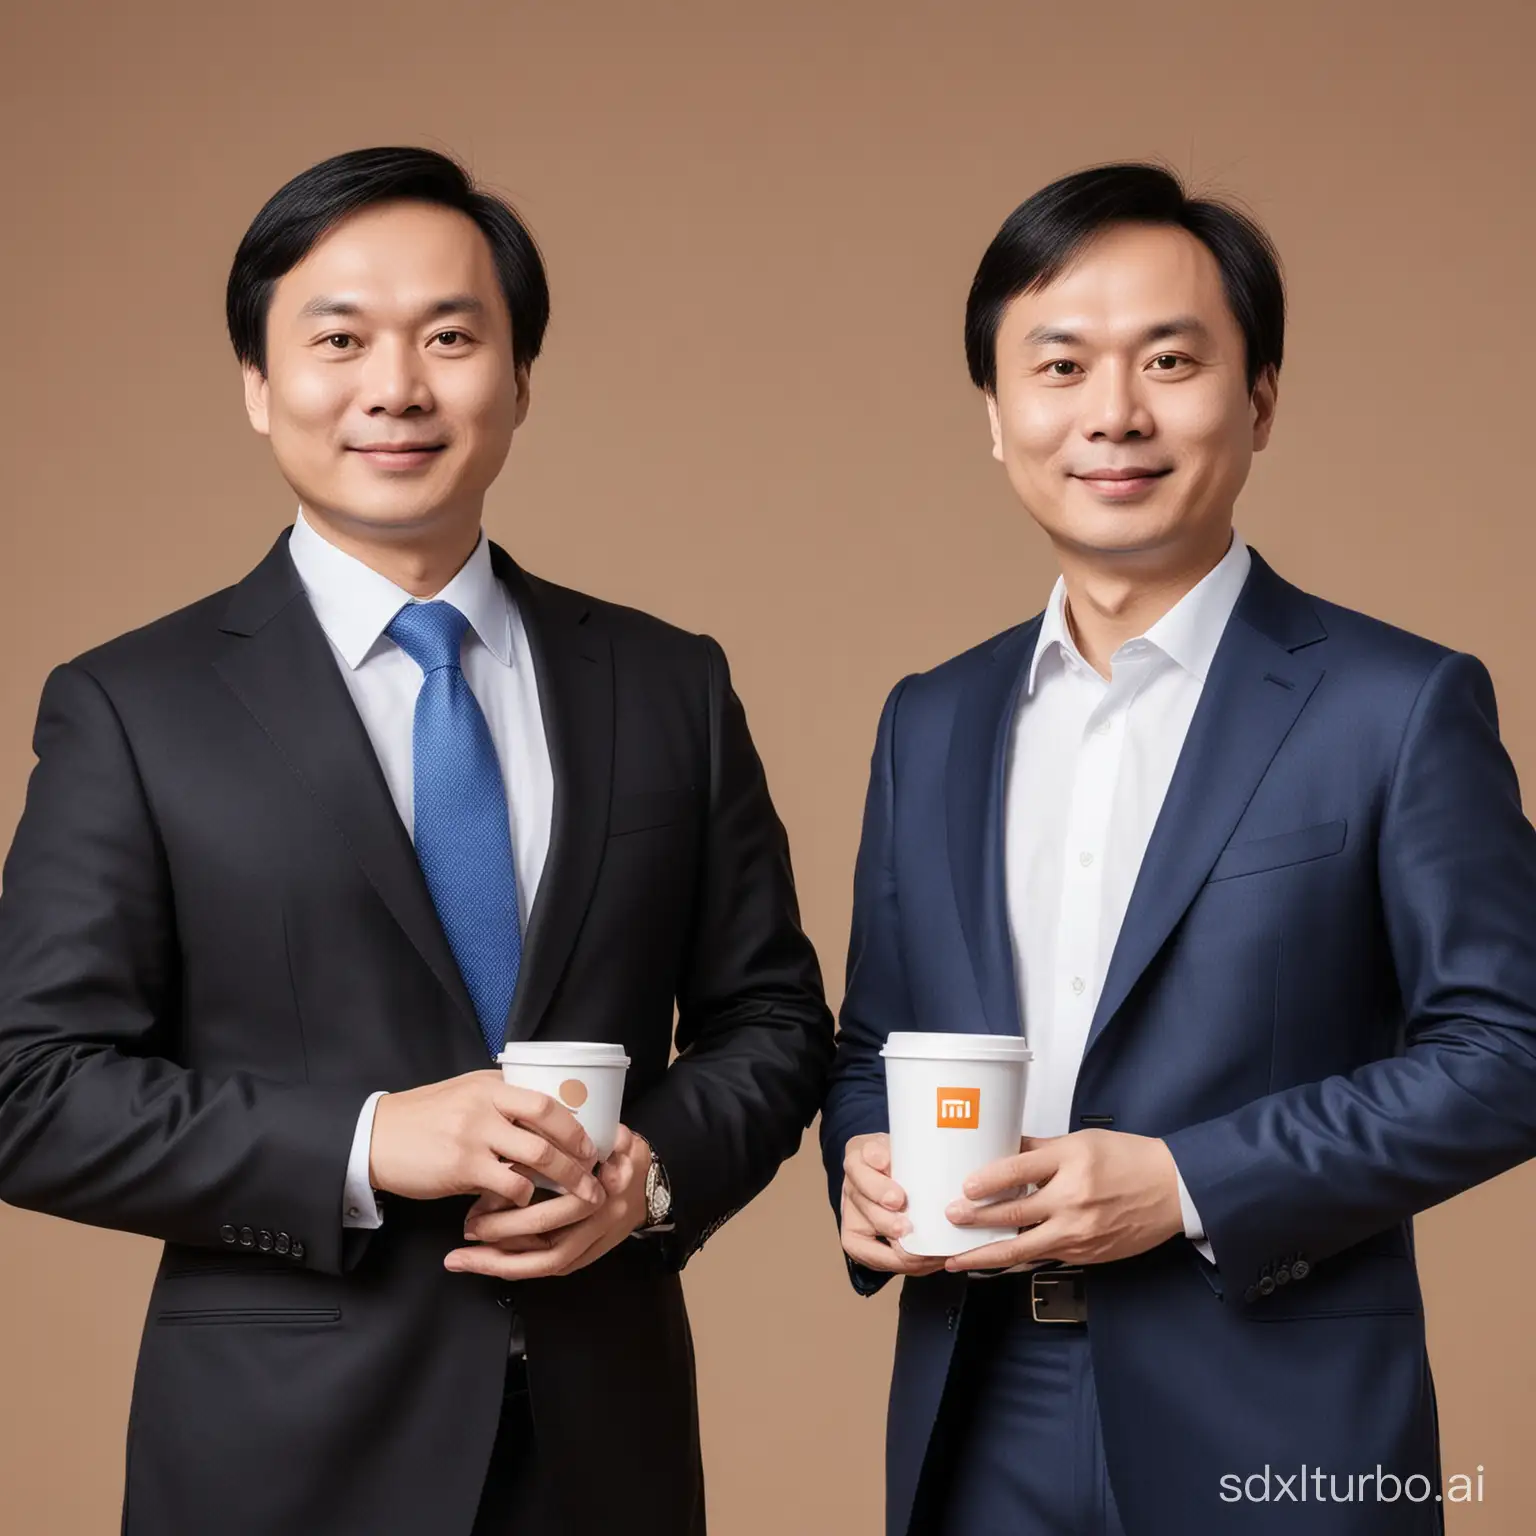 Lei-Jun-and-Jing-Kong-Founders-of-Xiaomi-Corporation-in-Professional-Attire